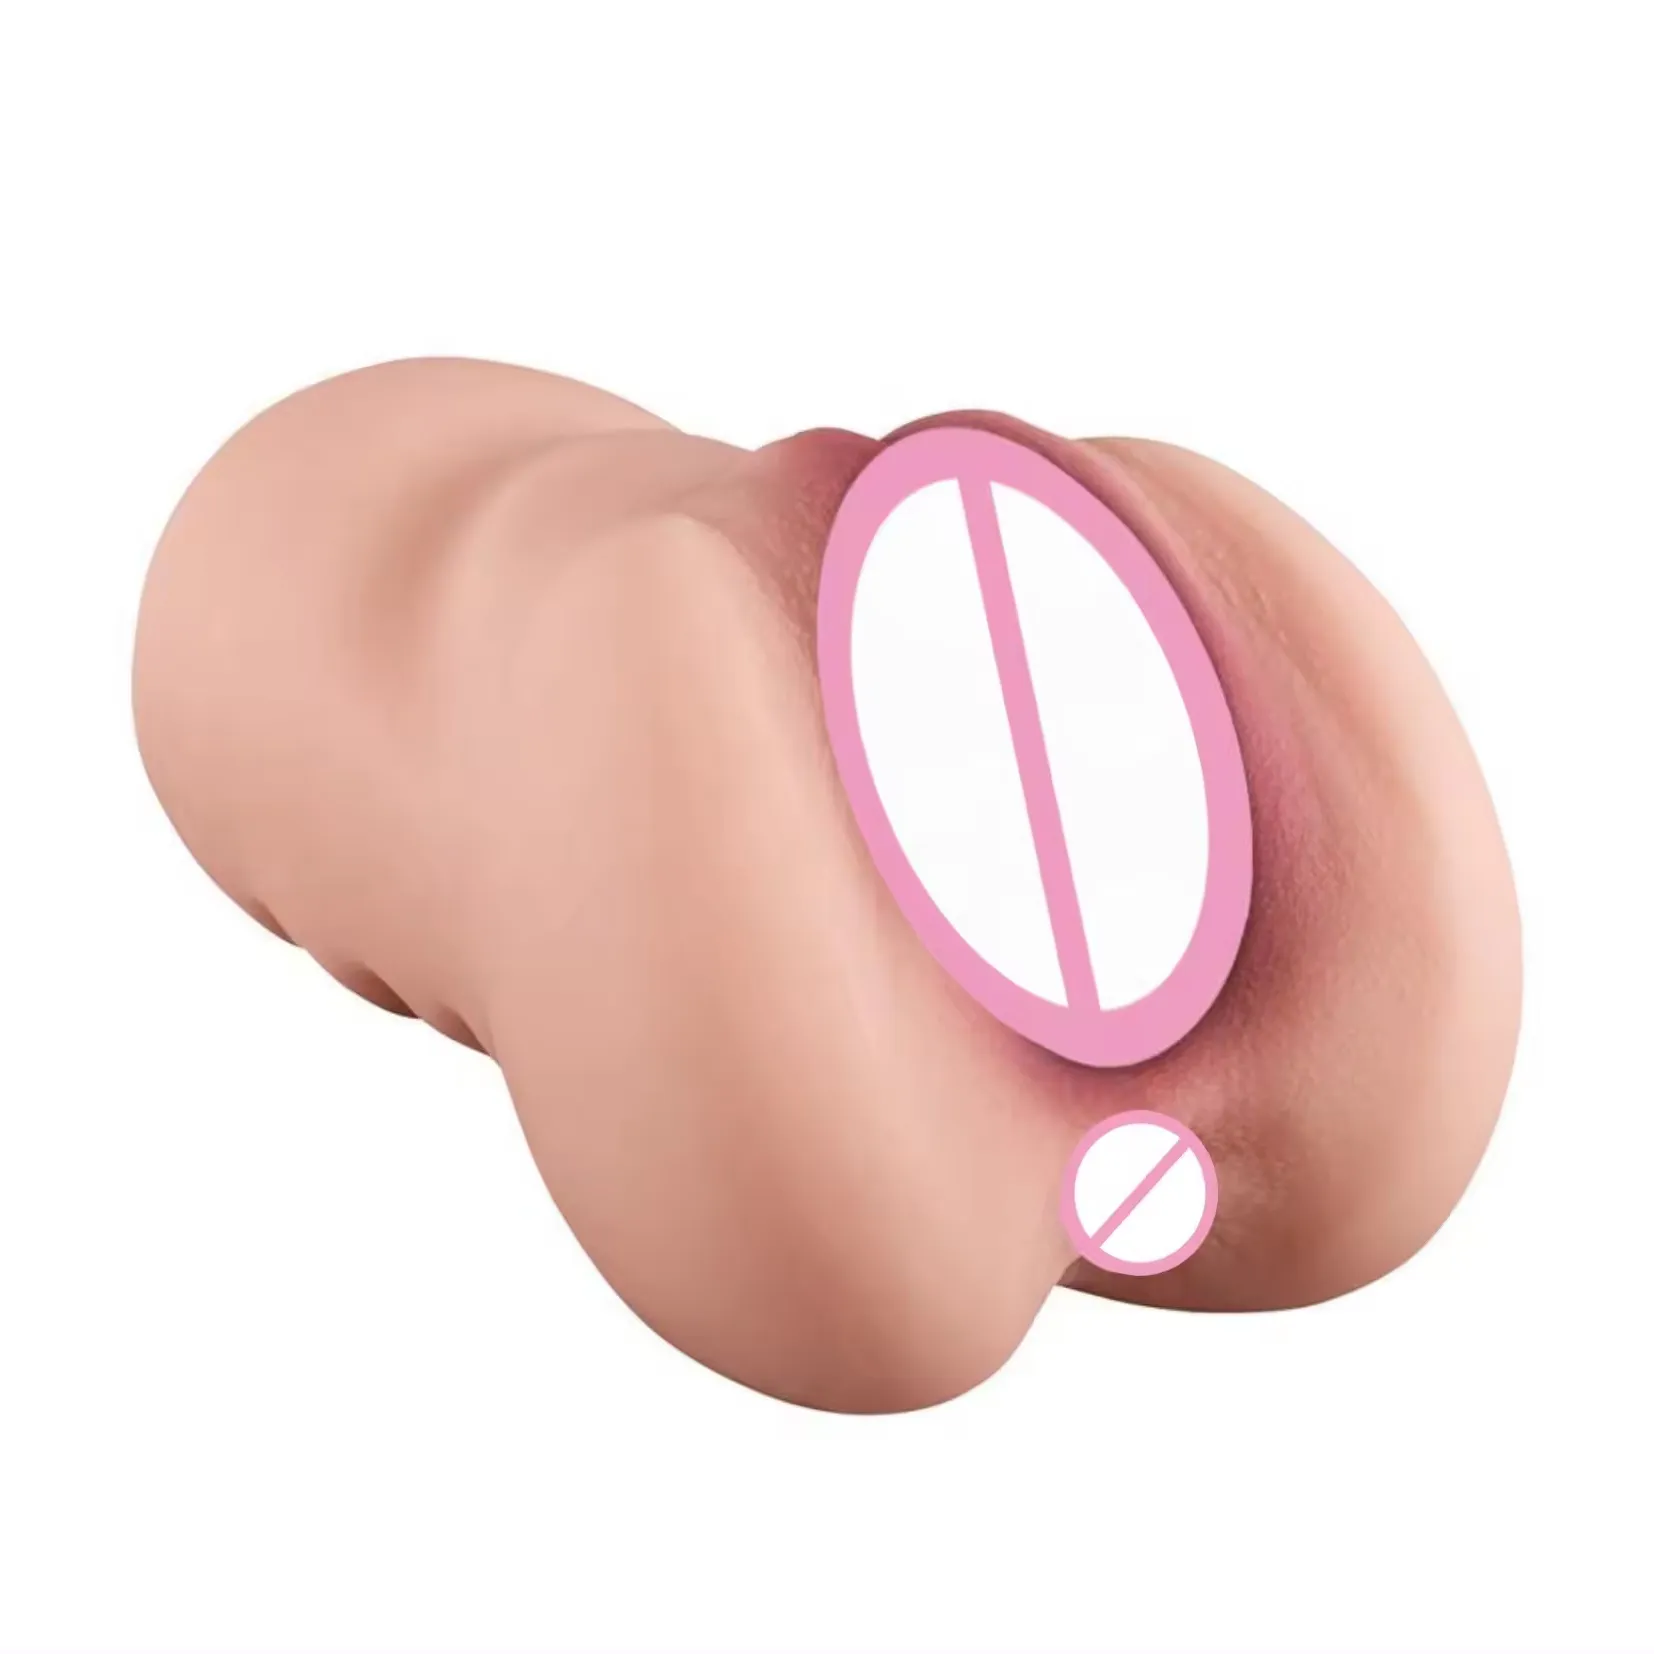 fat texture vagina tight anus for male adult sexual genitalia toy sax anal doll Silicone vagina toys